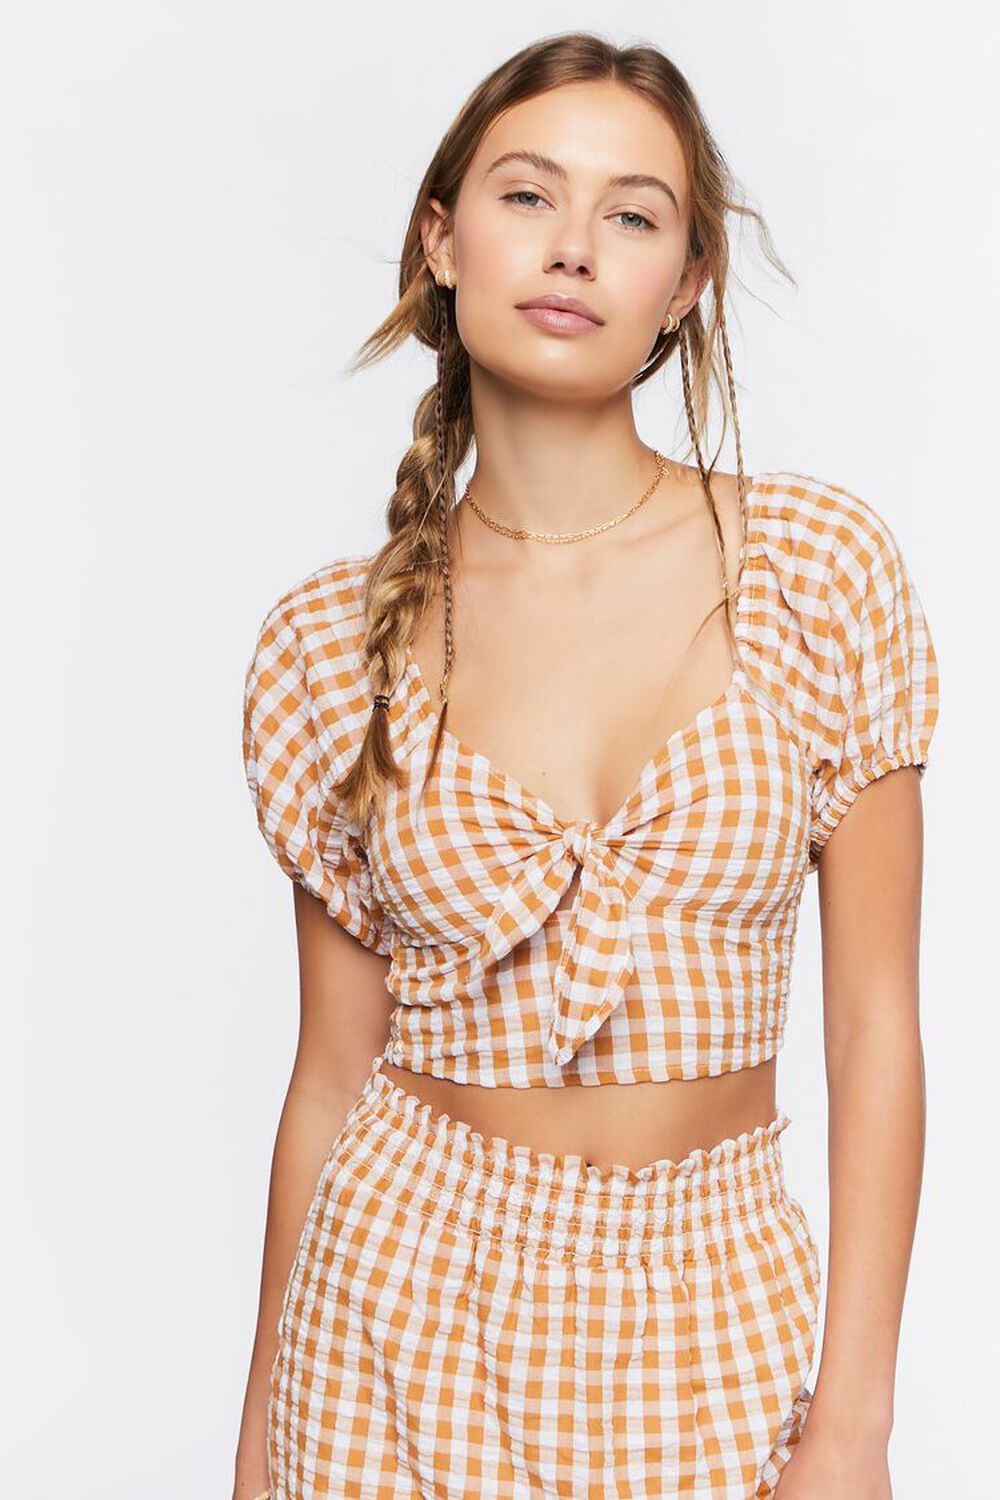 MAPLE/WHITE Gingham Crop Top, image 1